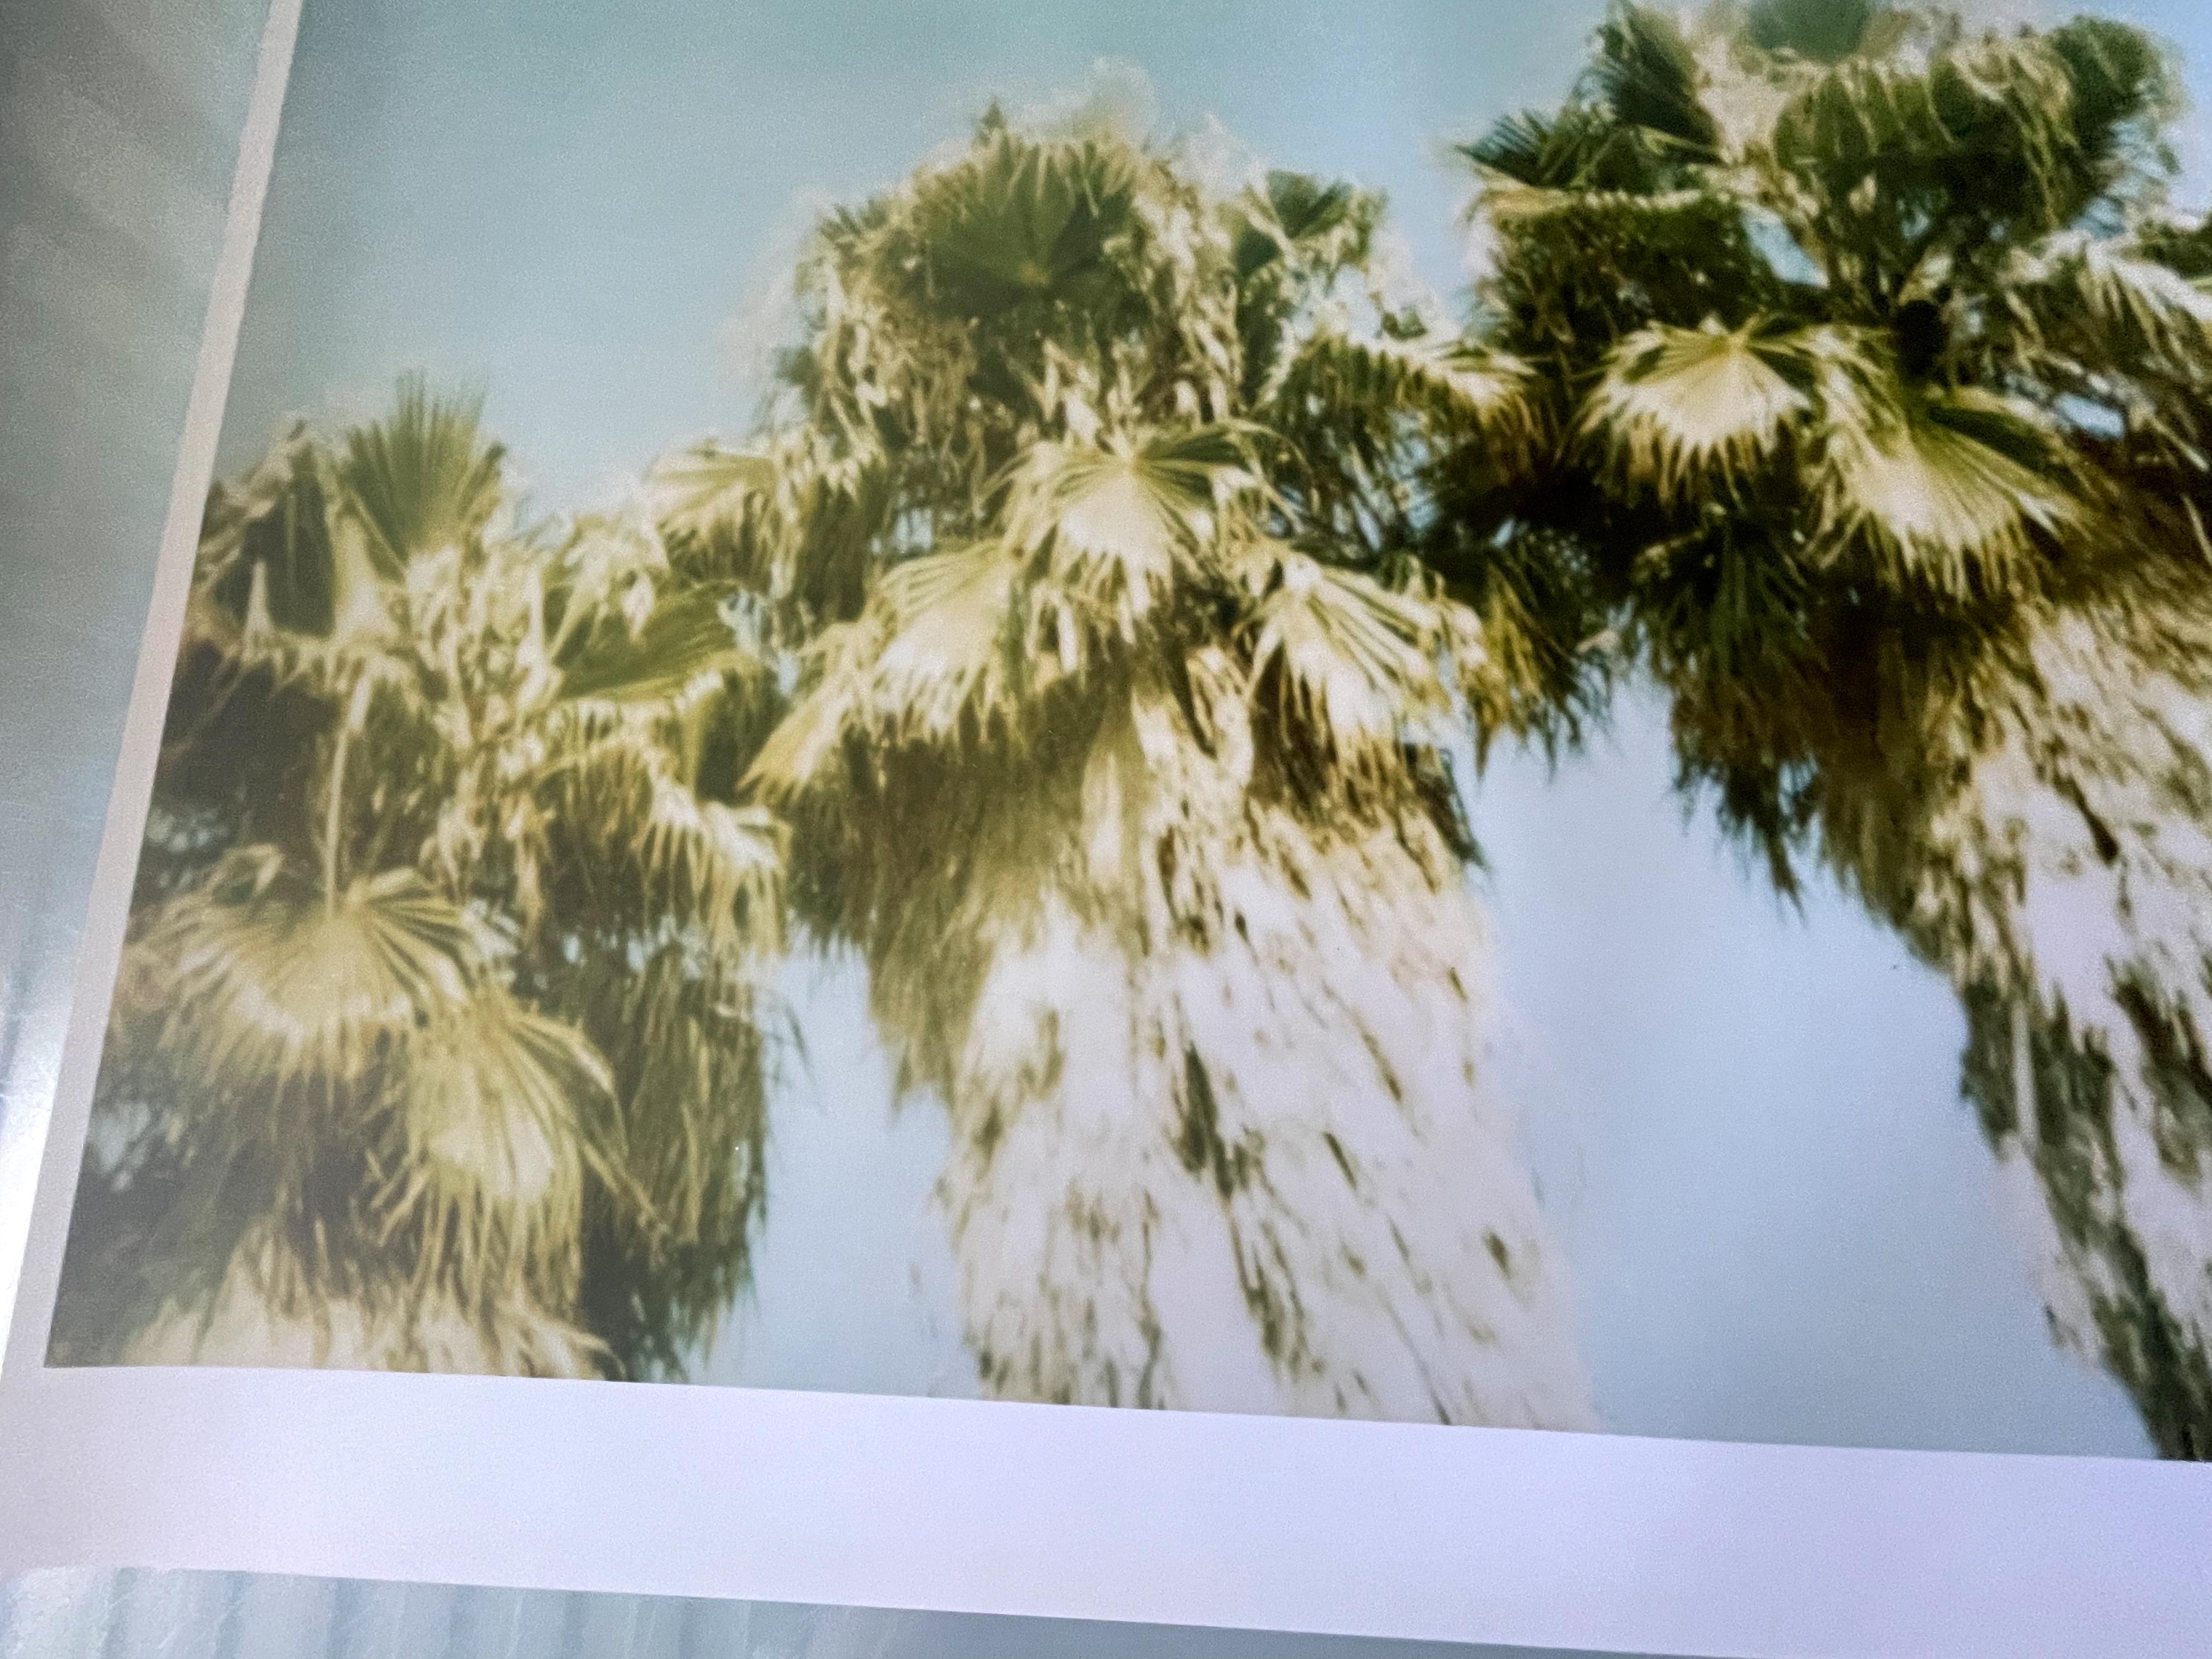 Palm Trees Dive by (Stranger than Paradise) - 1999

44x59cm, 
Edition 2/10.  
Analog C-Print, hand-printed by the artist, based on the Polaroid.  
Certificate and Signature label. 
Artist Inventory No. 498.02.  
Not mounted. 

Stefanie Schneider's